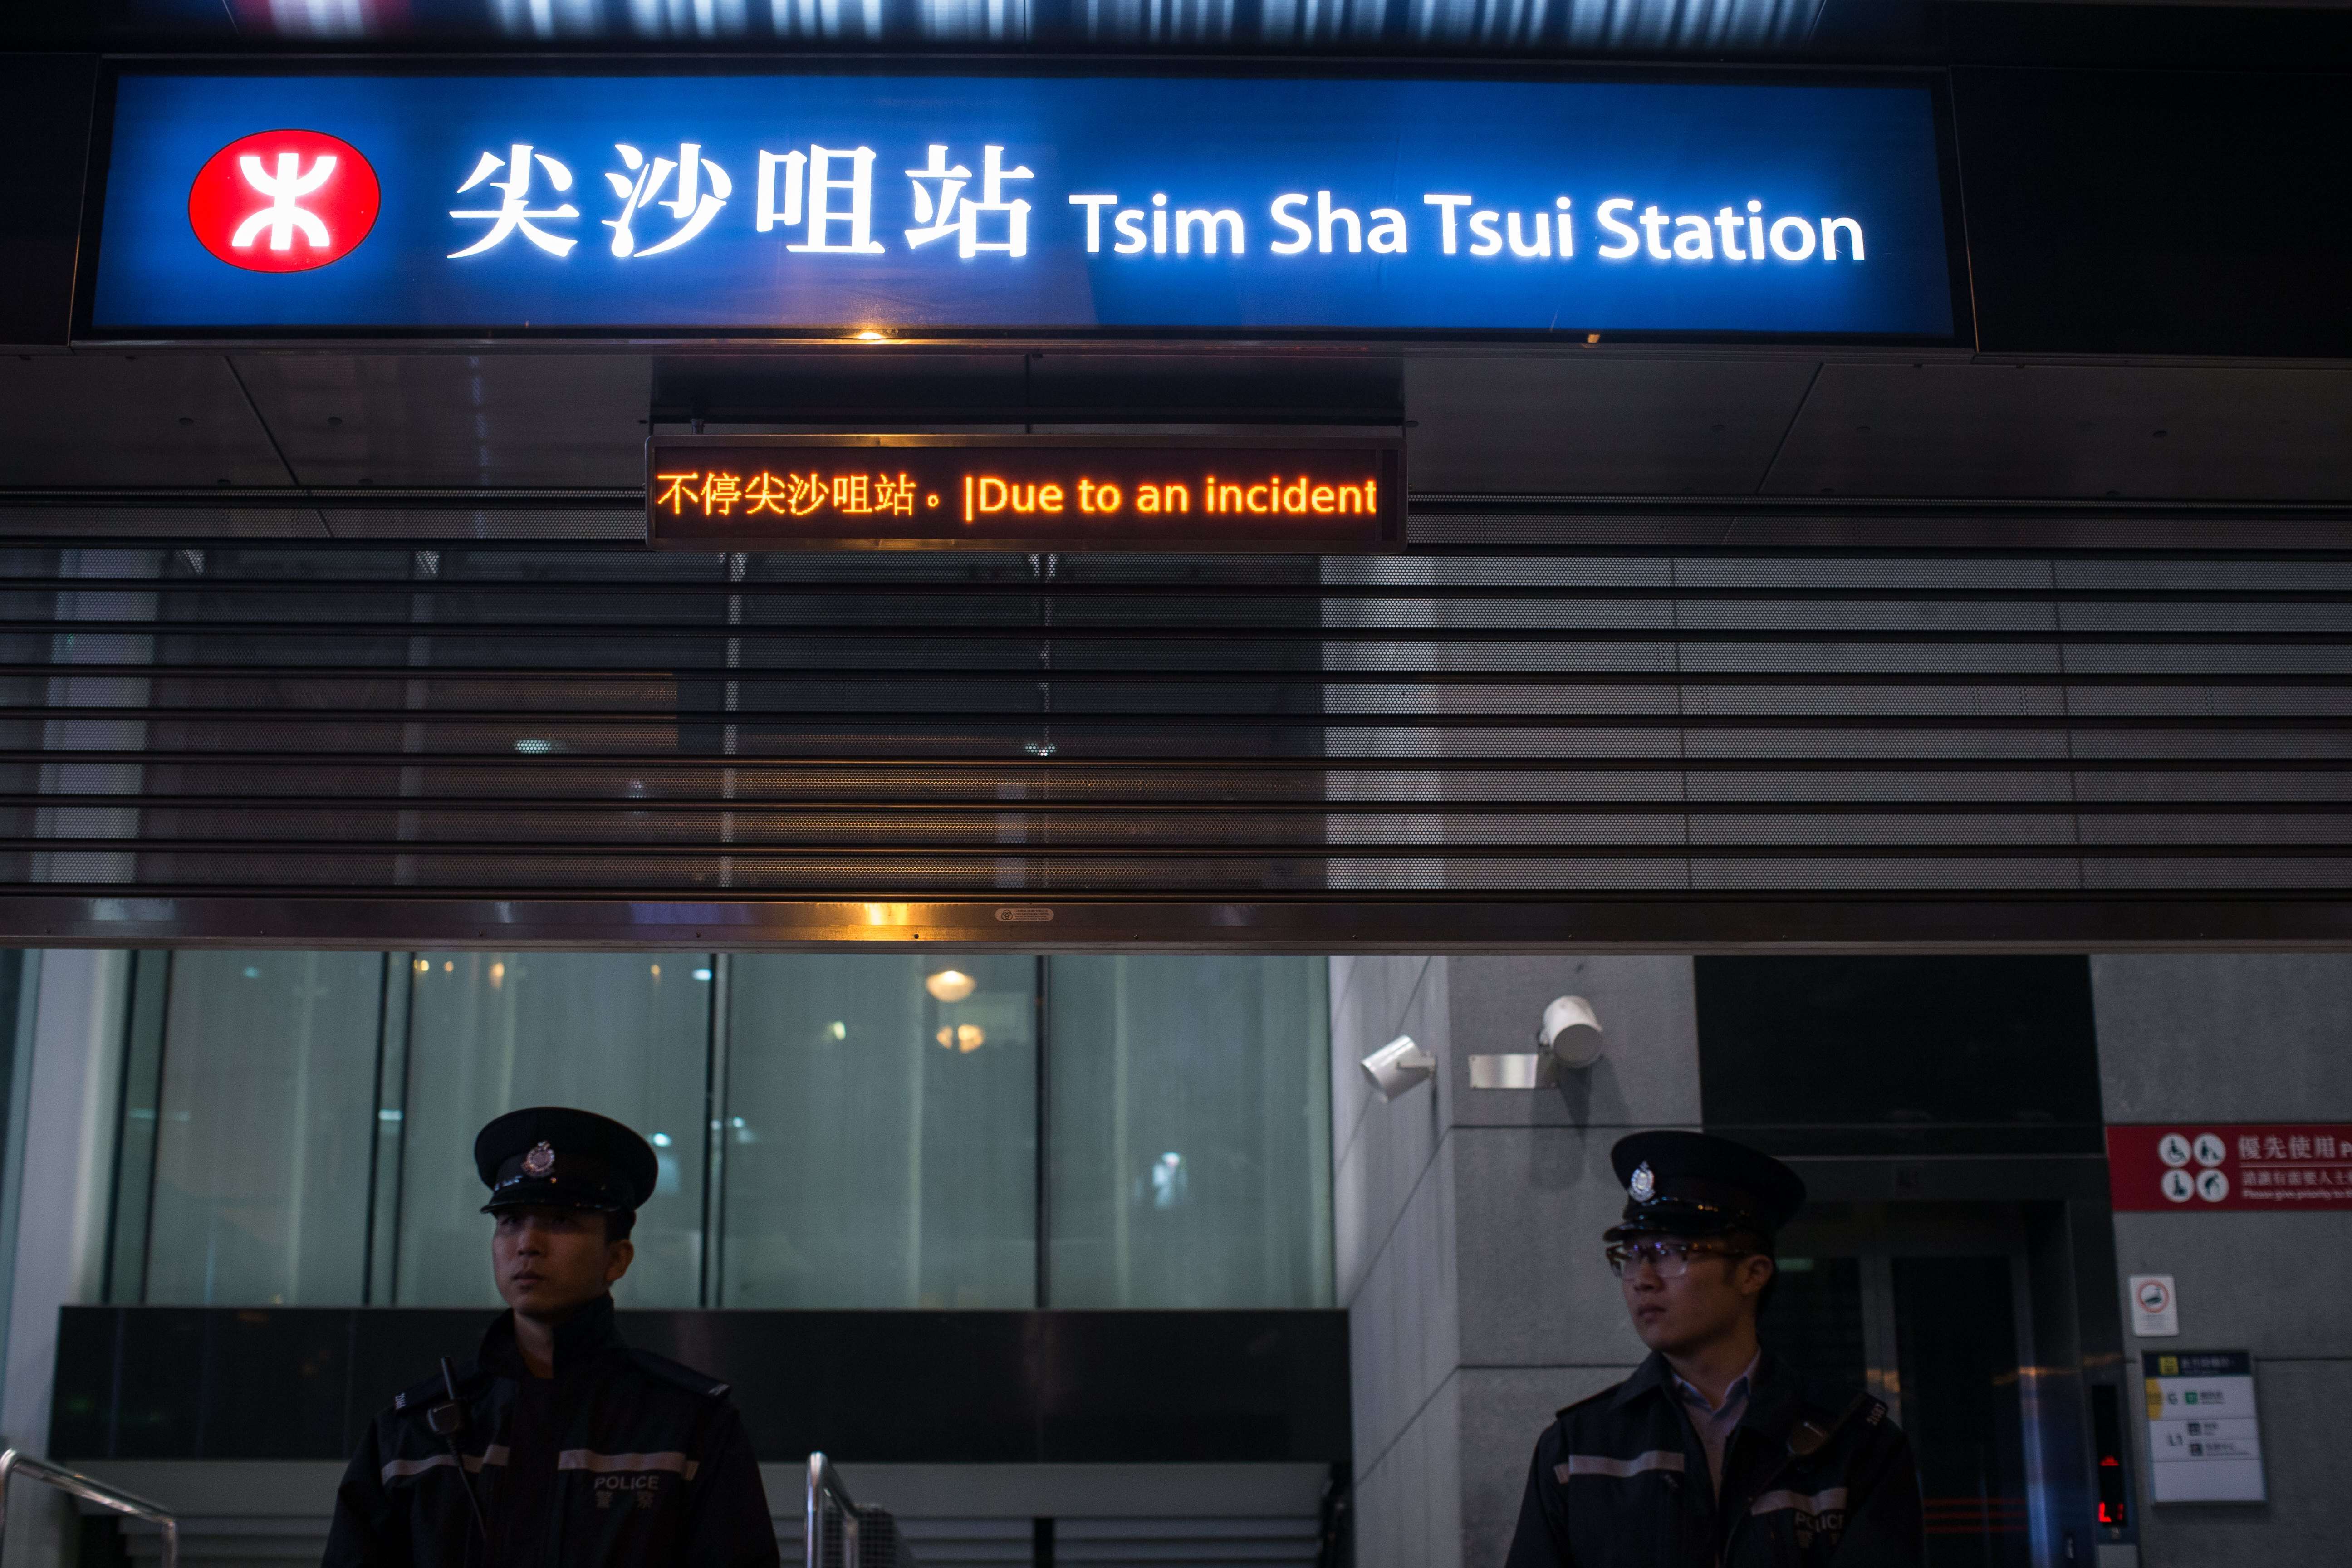 Police officers stand guard outside a closed Tsim Sha Tsui MTR station on February 10, after a man hurled a firebomb on a crowded train during the evening rush hour, injuring at least 18 people. Photo: EPA